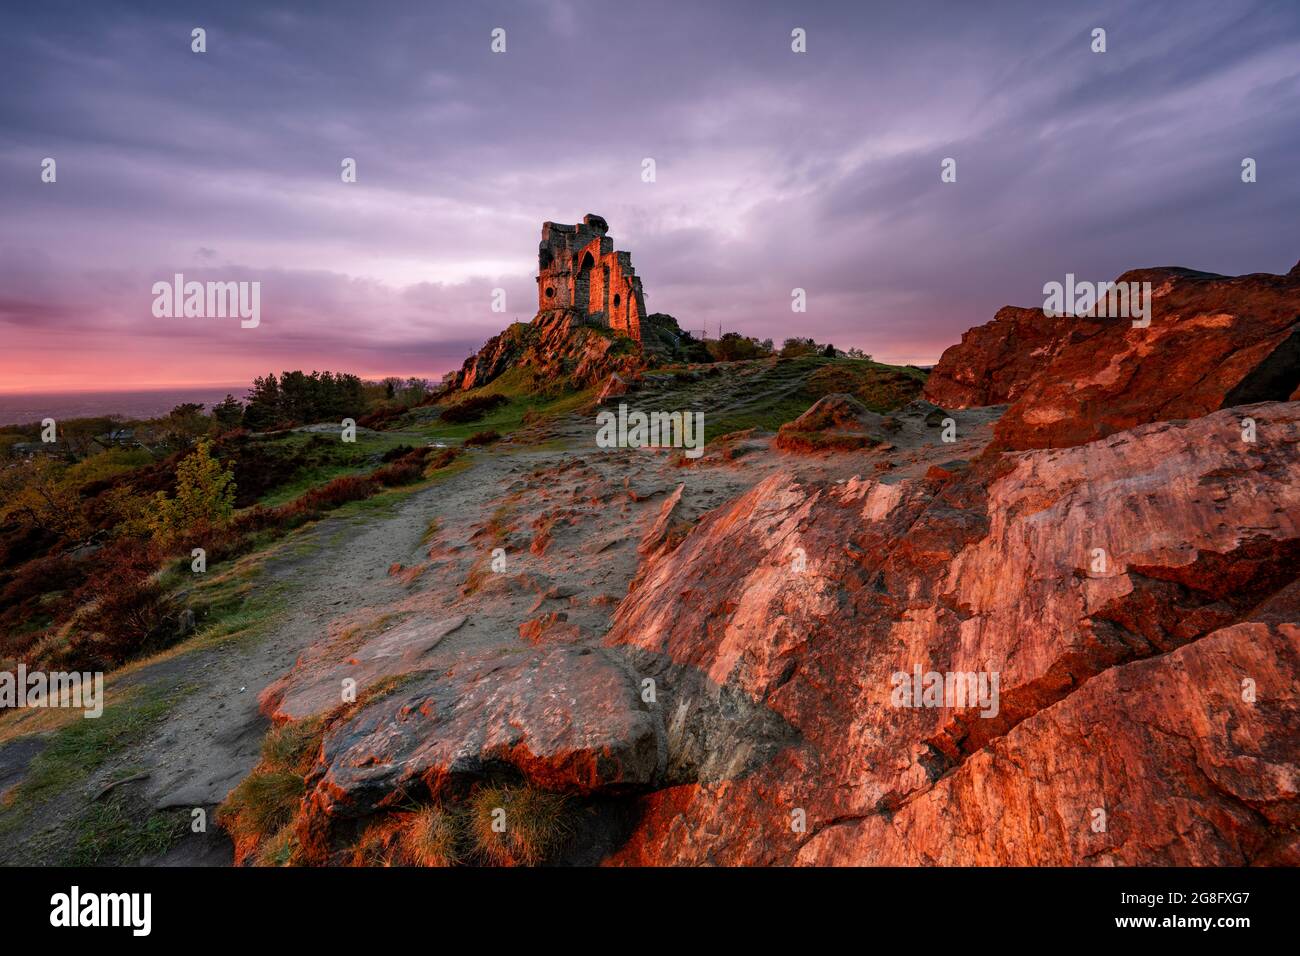 The Folly at Mow Cop illuminated by amazing sunset, Mow Cop, Cheshire, England, United Kingdom, Europe Stock Photo